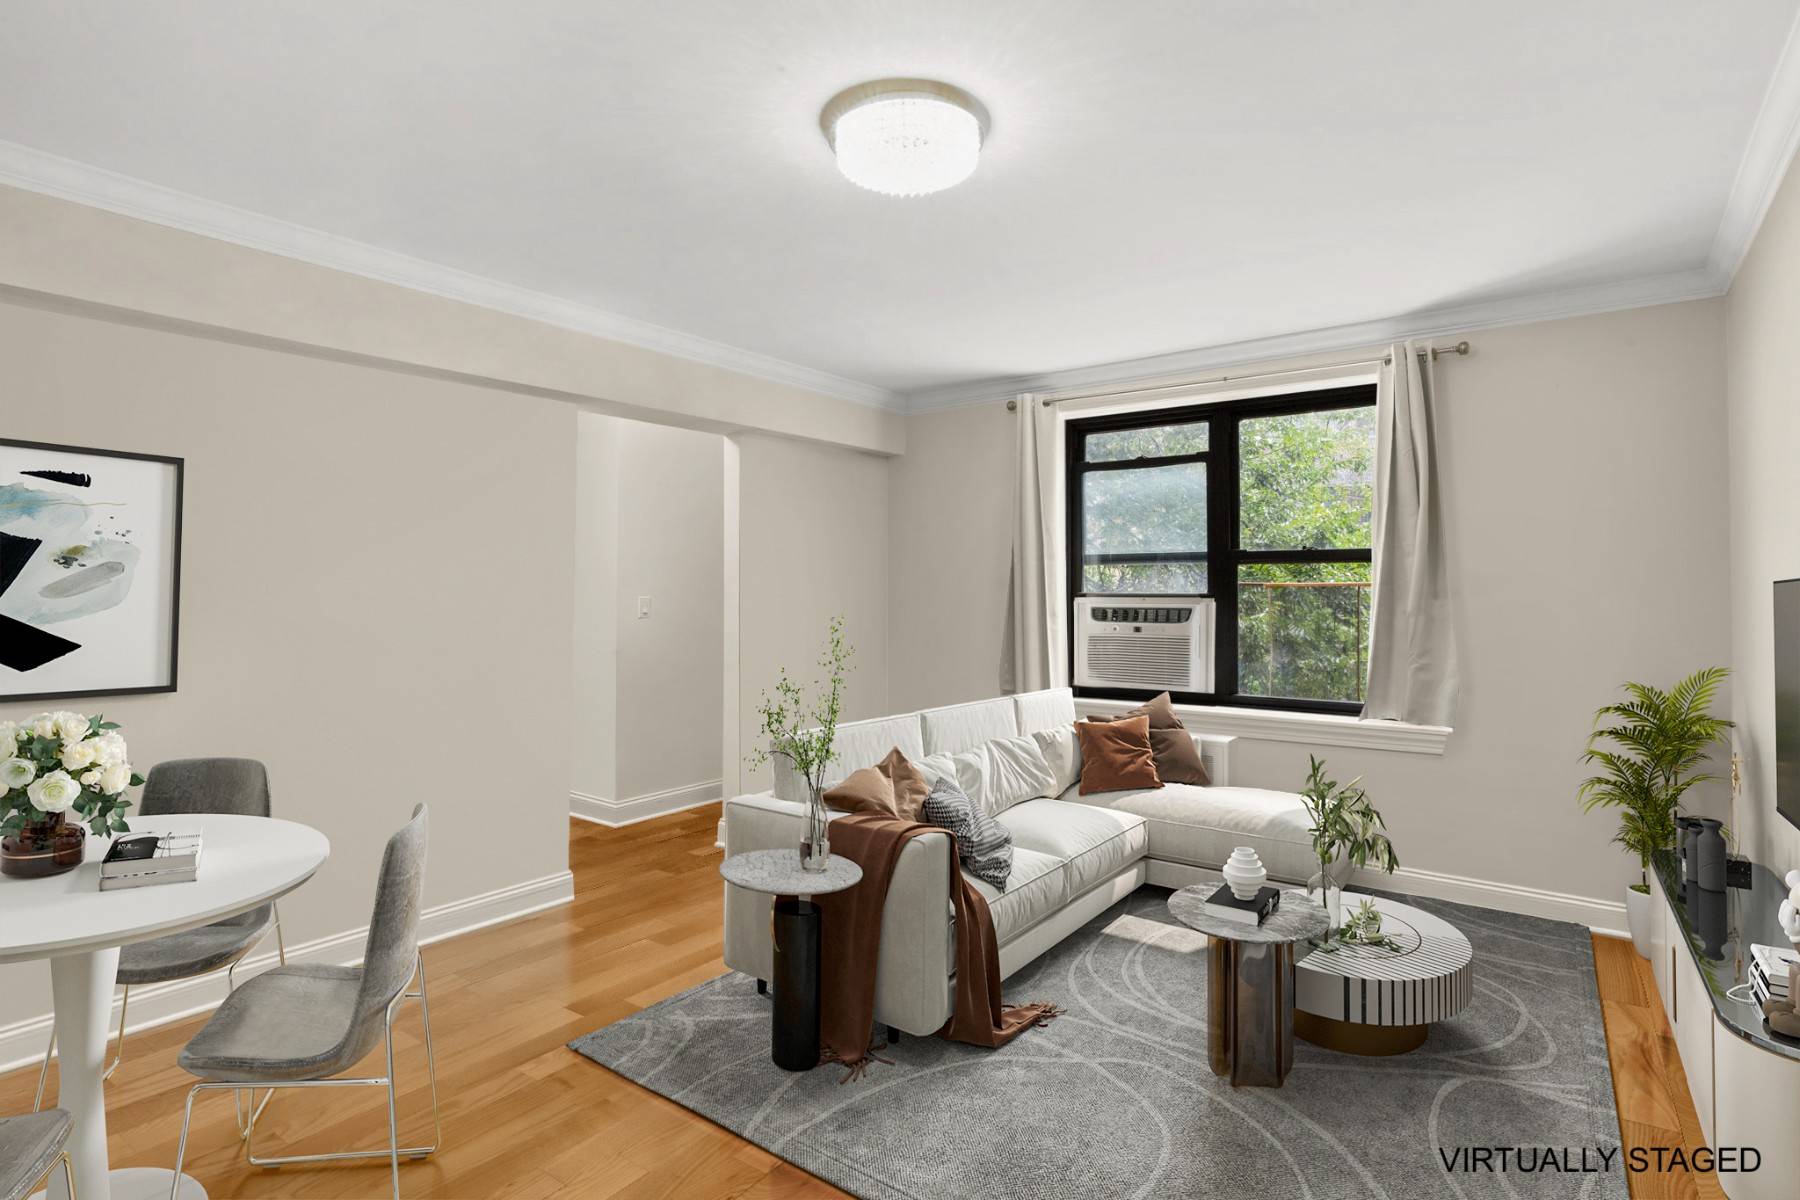 Corner unit ! This spacious, recently renovated 1 bed 1 bath apartment has windows with eastern exposure allowing natural light to pour in throughout the day.